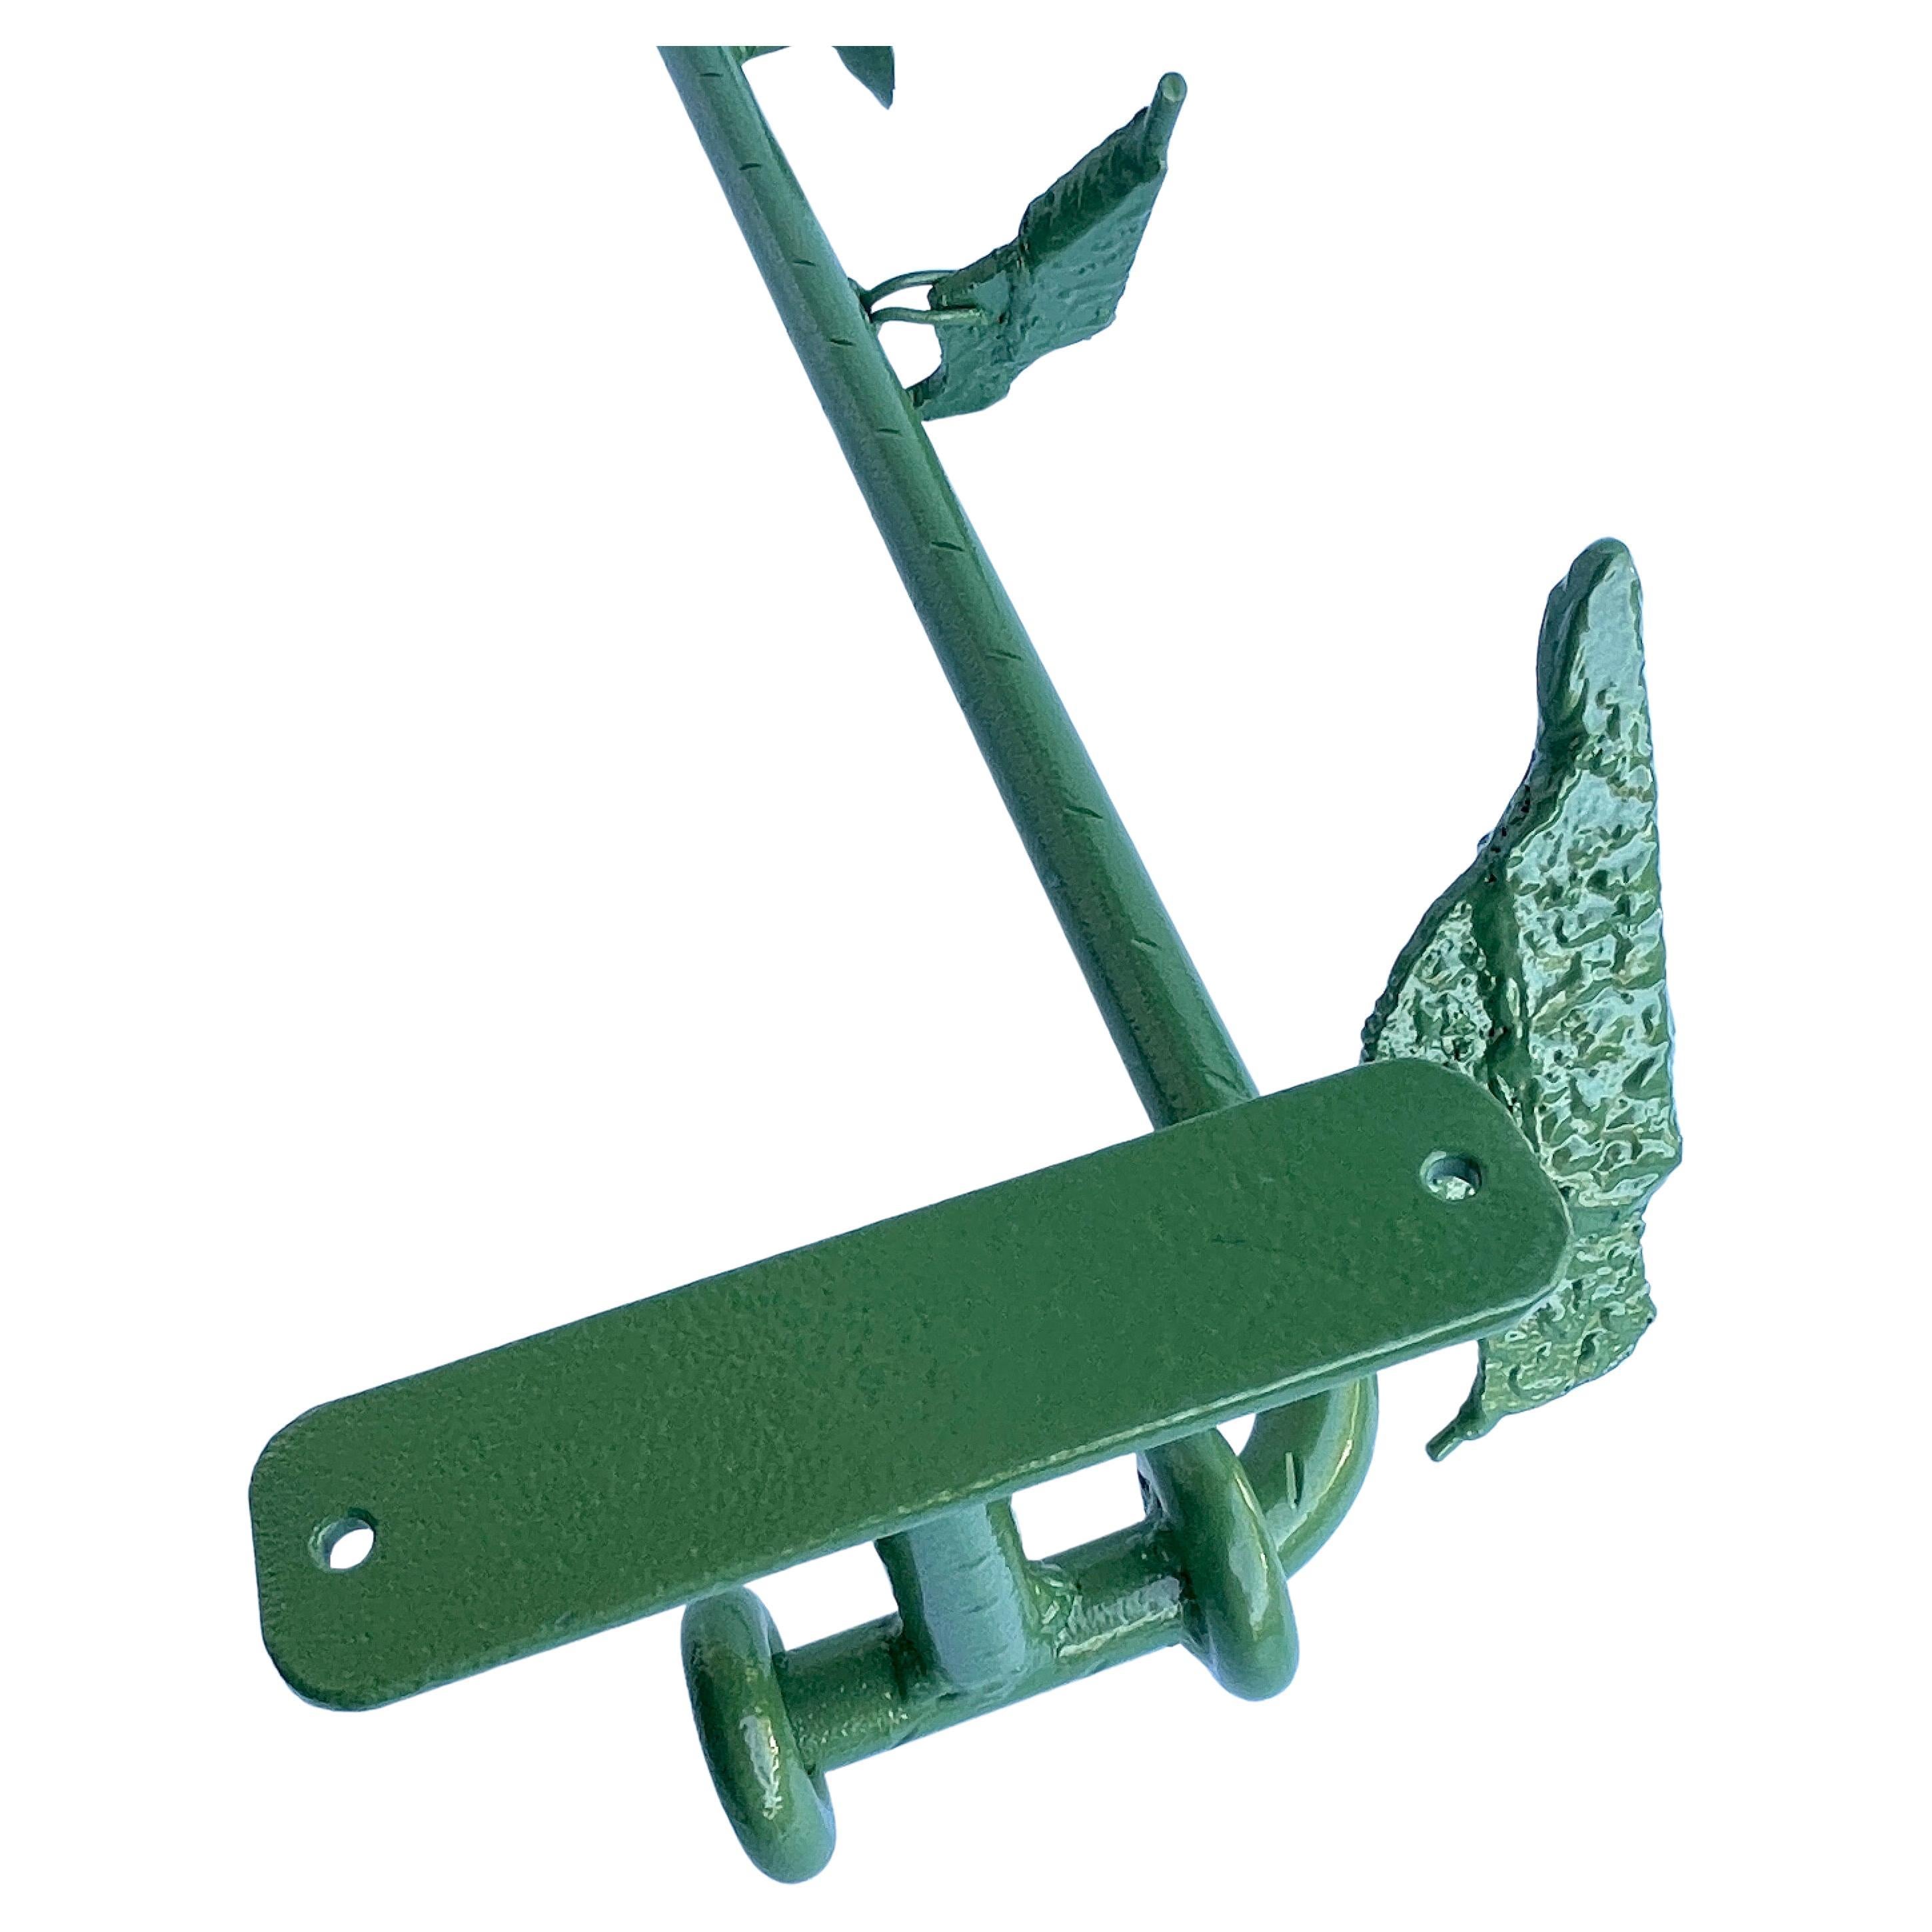 Hand-Crafted Iron Wall Bar Rod With Birds, Green Powder-Coated For Sale 5